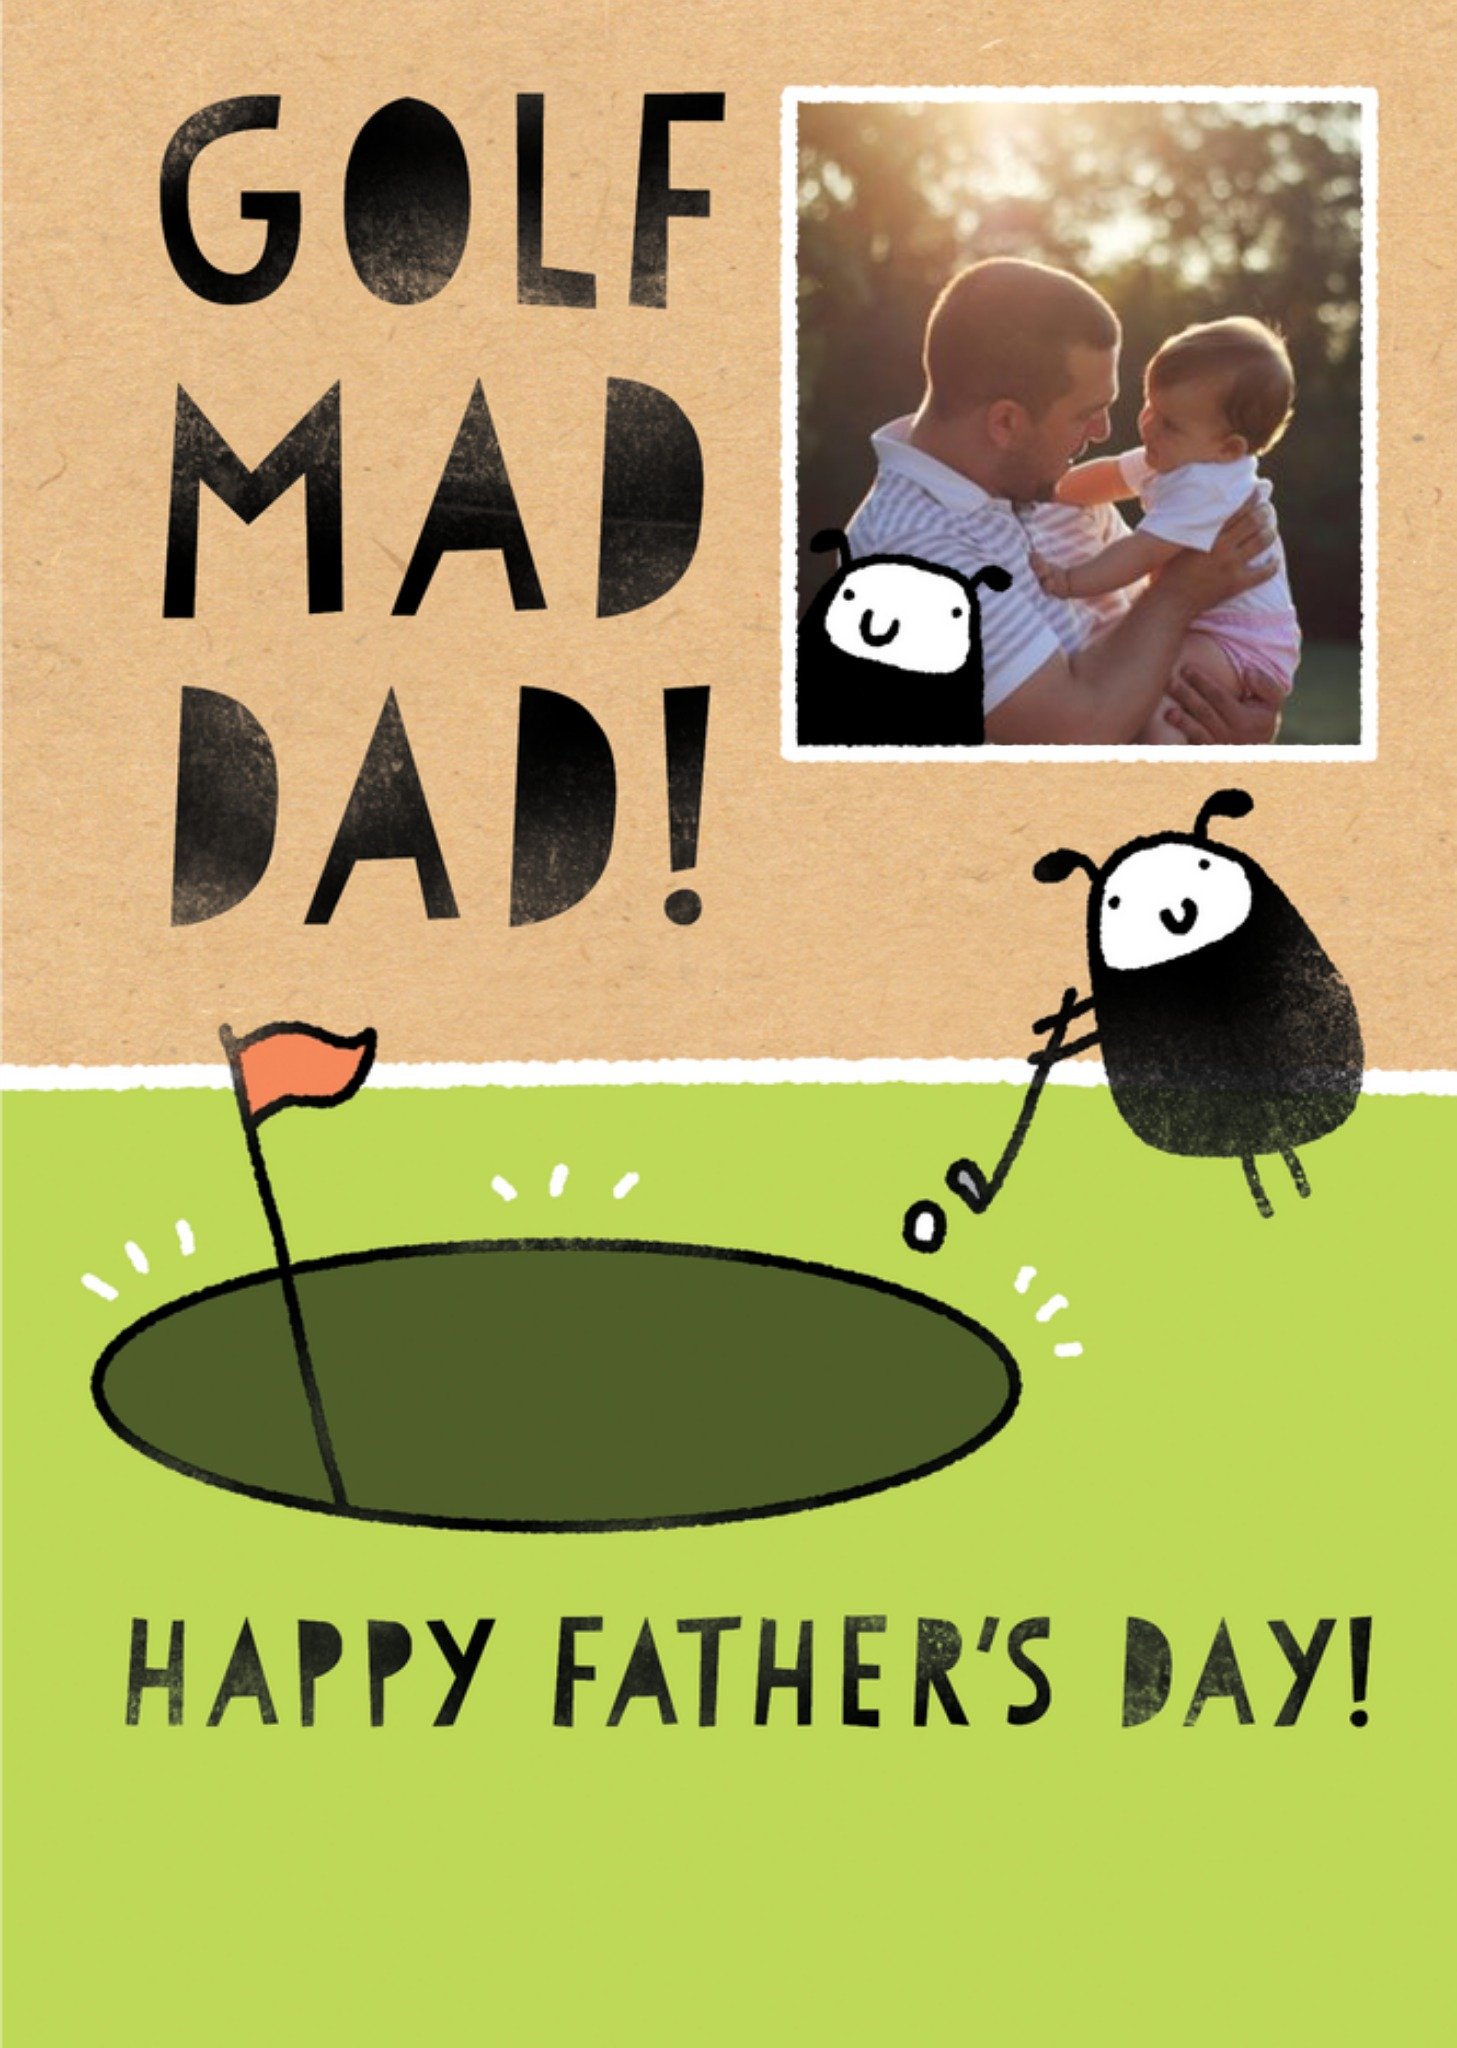 Moonpig Cute Illustration Of A Sheep Playing Golf Golf Mad Dad Personalised Fathers Card Day, Large